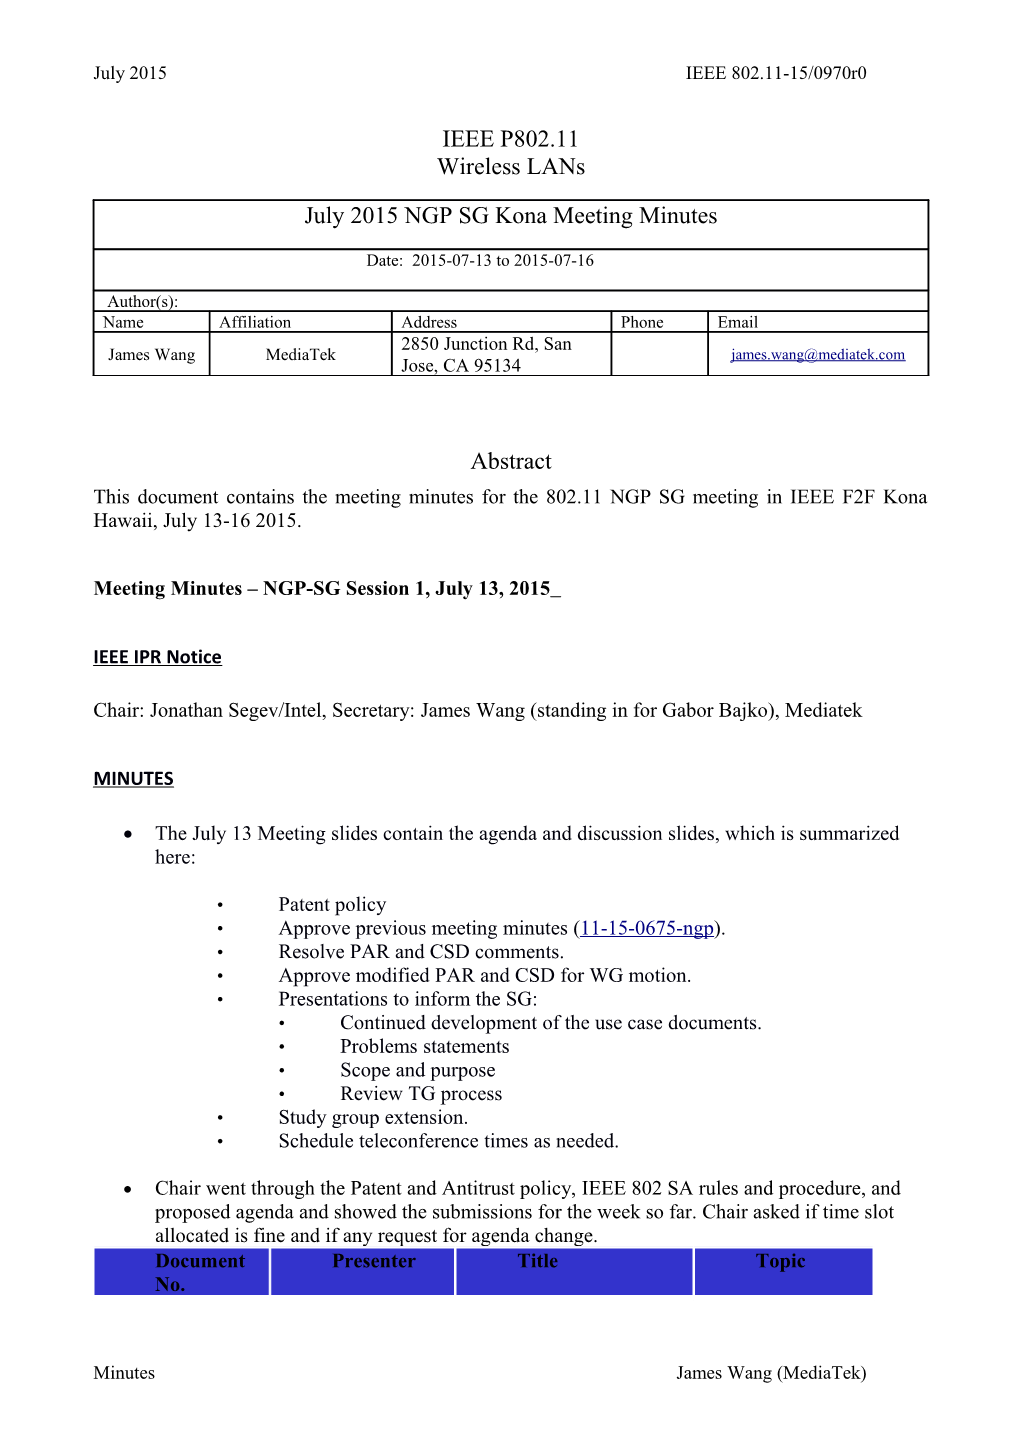 Meeting Minutes NGP-SG Session 1,July 13, 2015